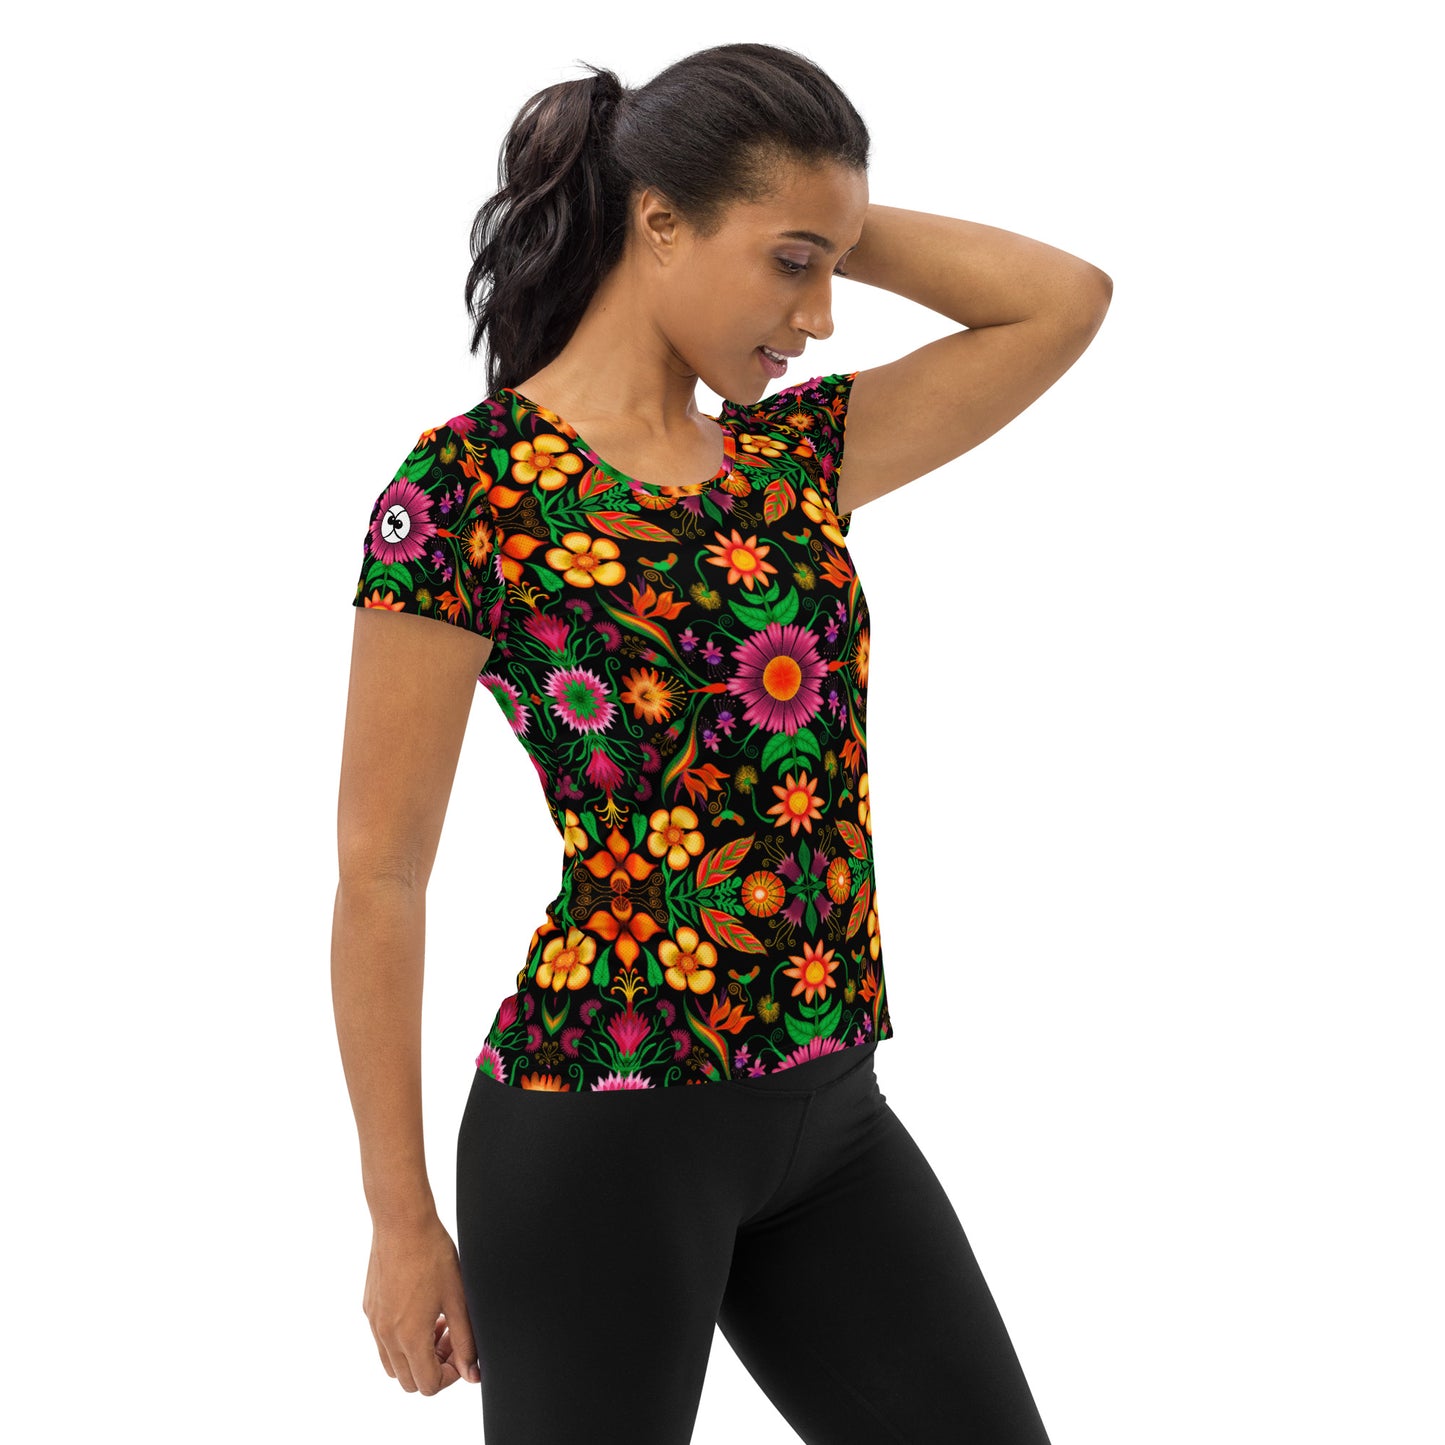 Wild flowers in a luxuriant jungle All-Over Print Women's Athletic T-shirt. Side view